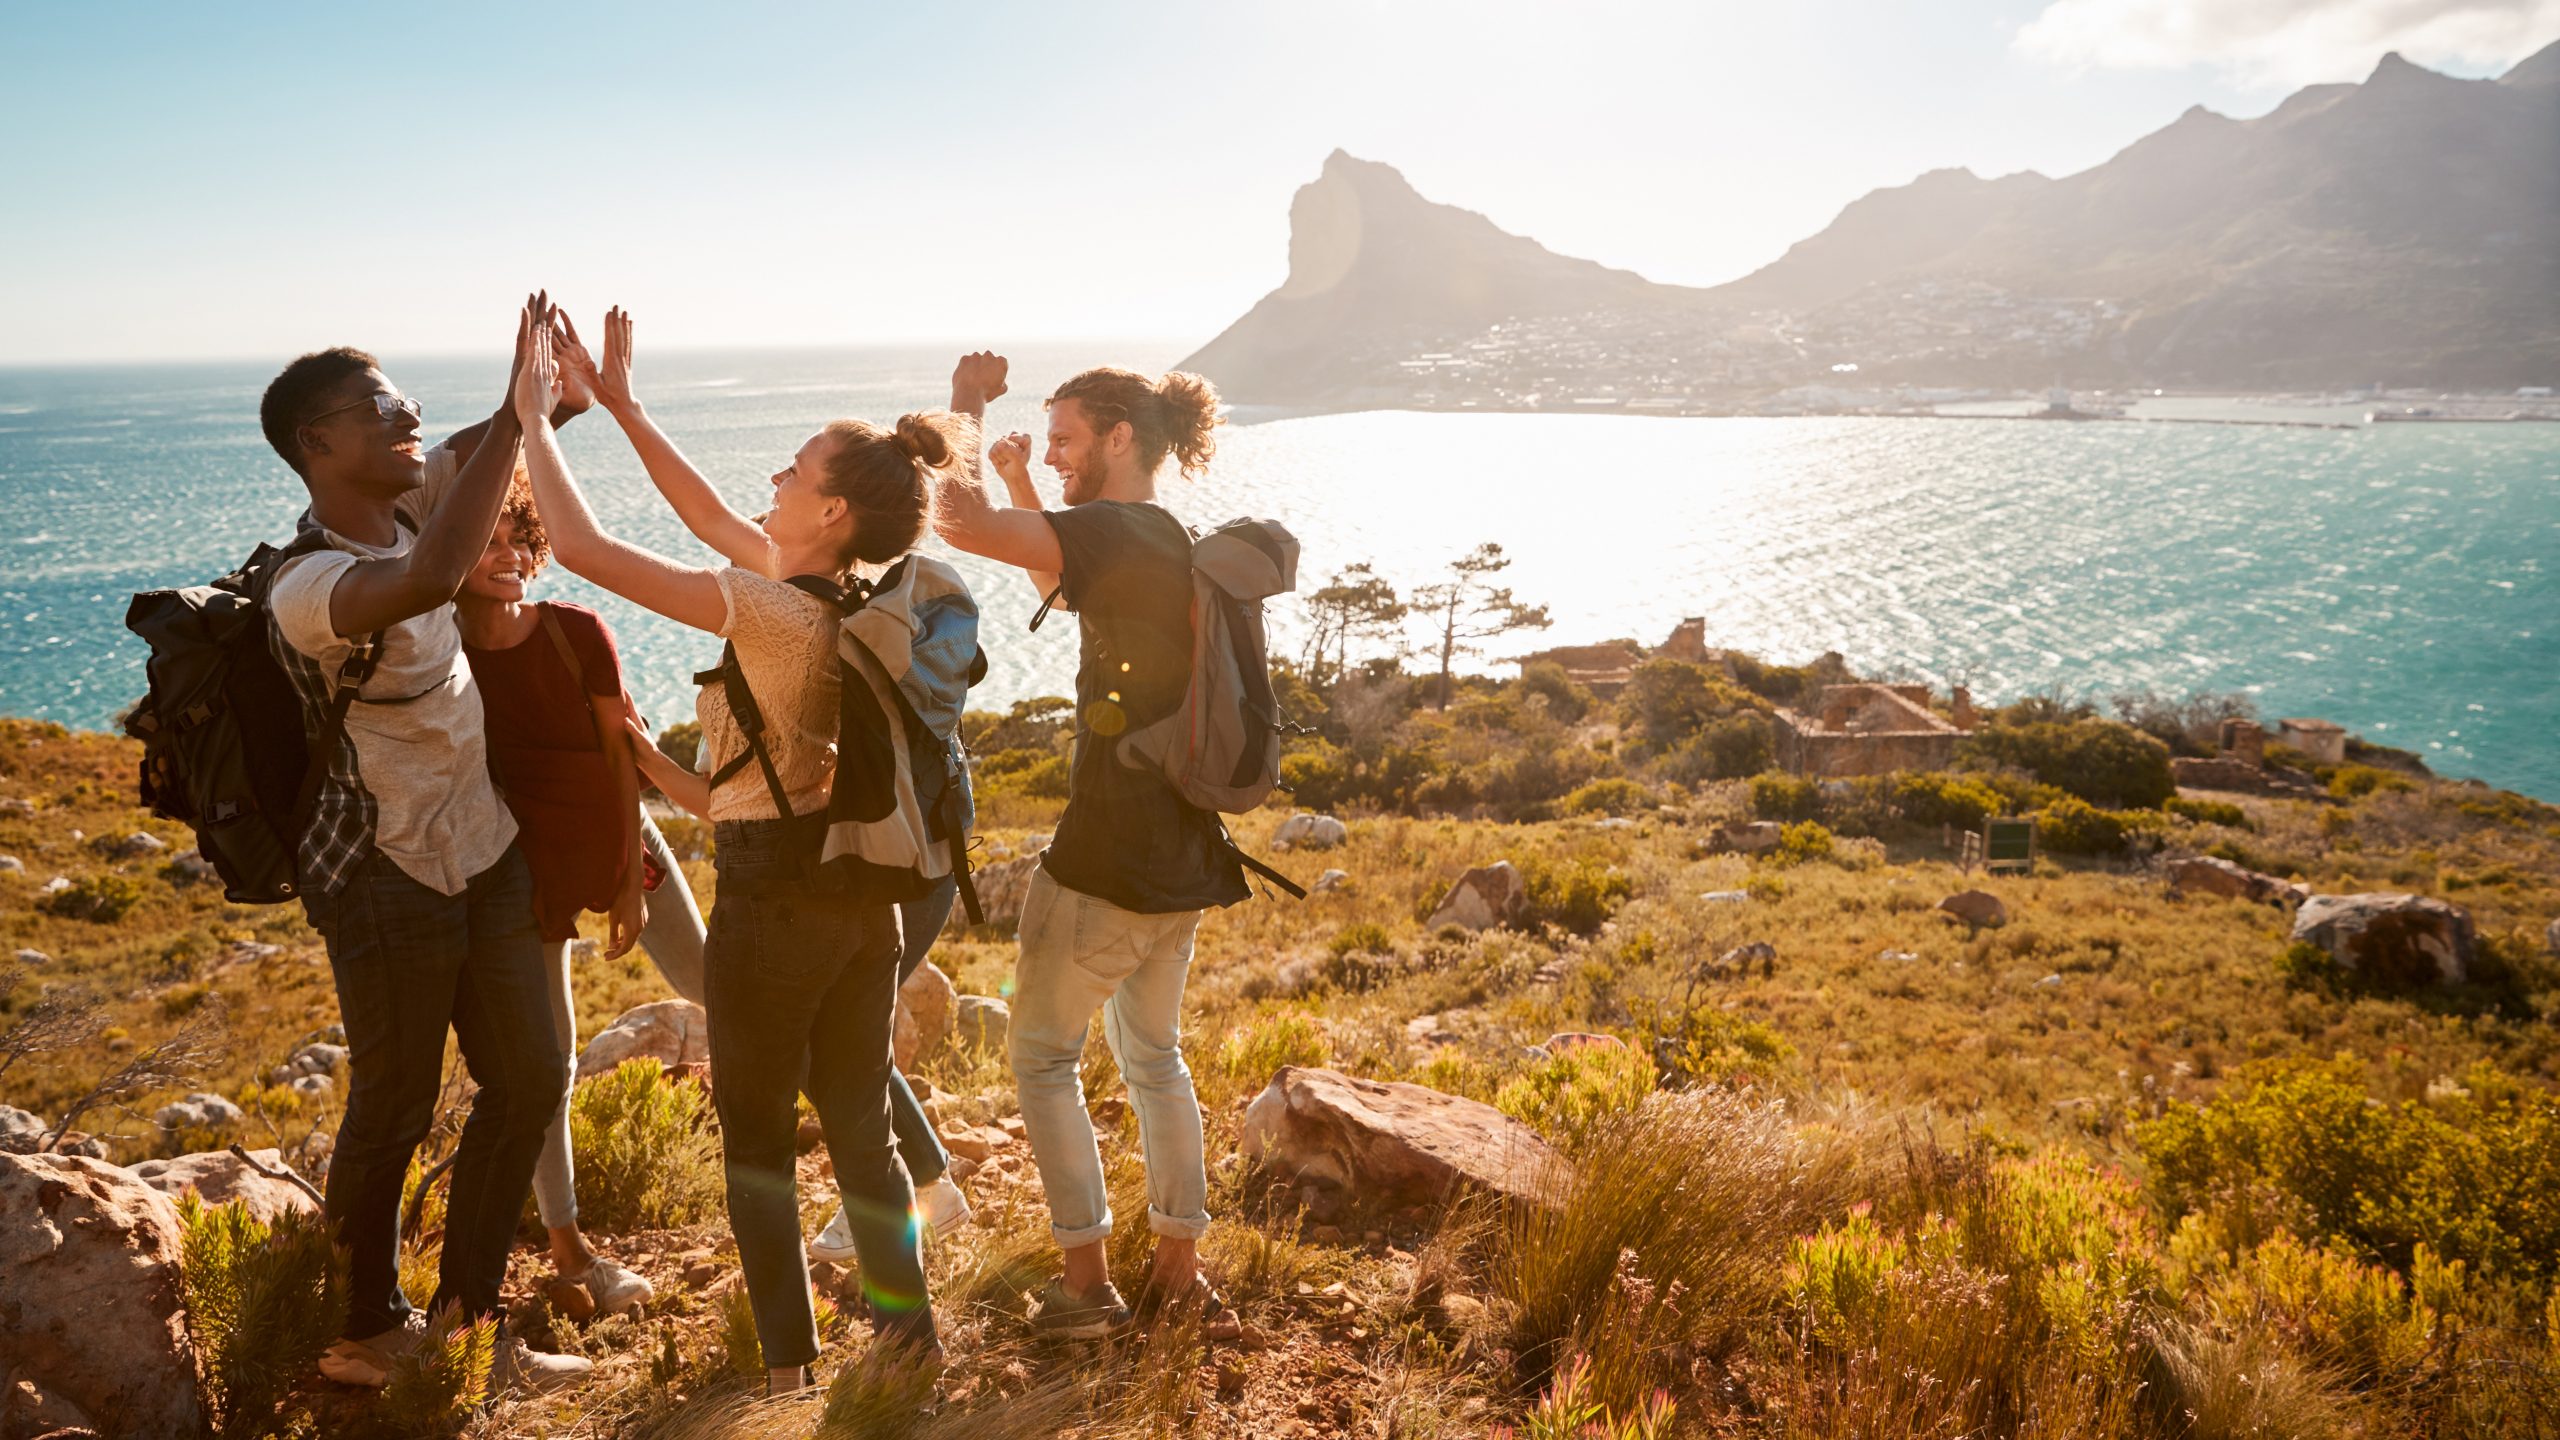 Young adult friends on a hike celebrate reaching a summit near the coast, full length, side view